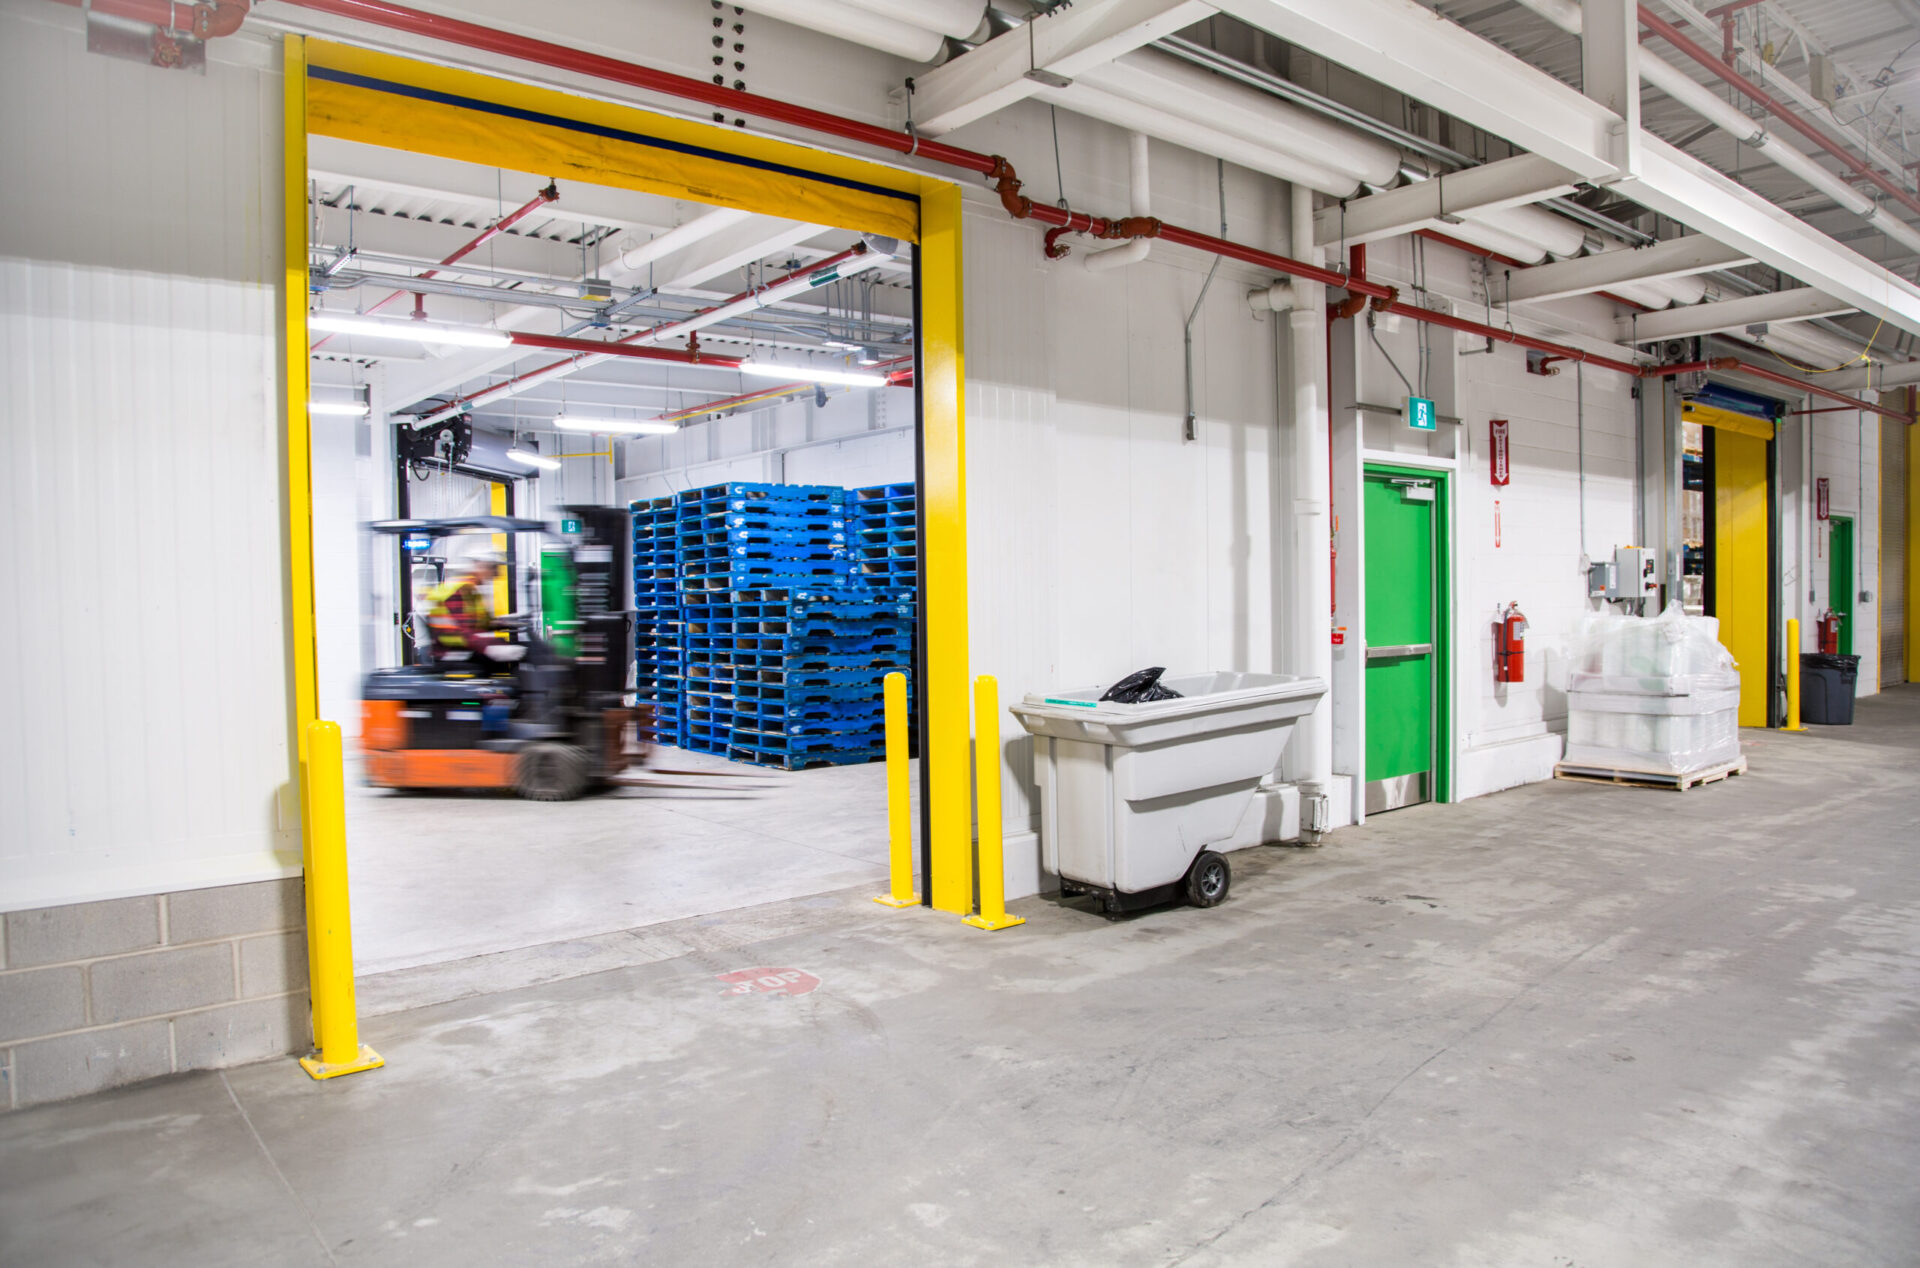 A forklift in a warehouse with yellow doors demonstrating engineering.